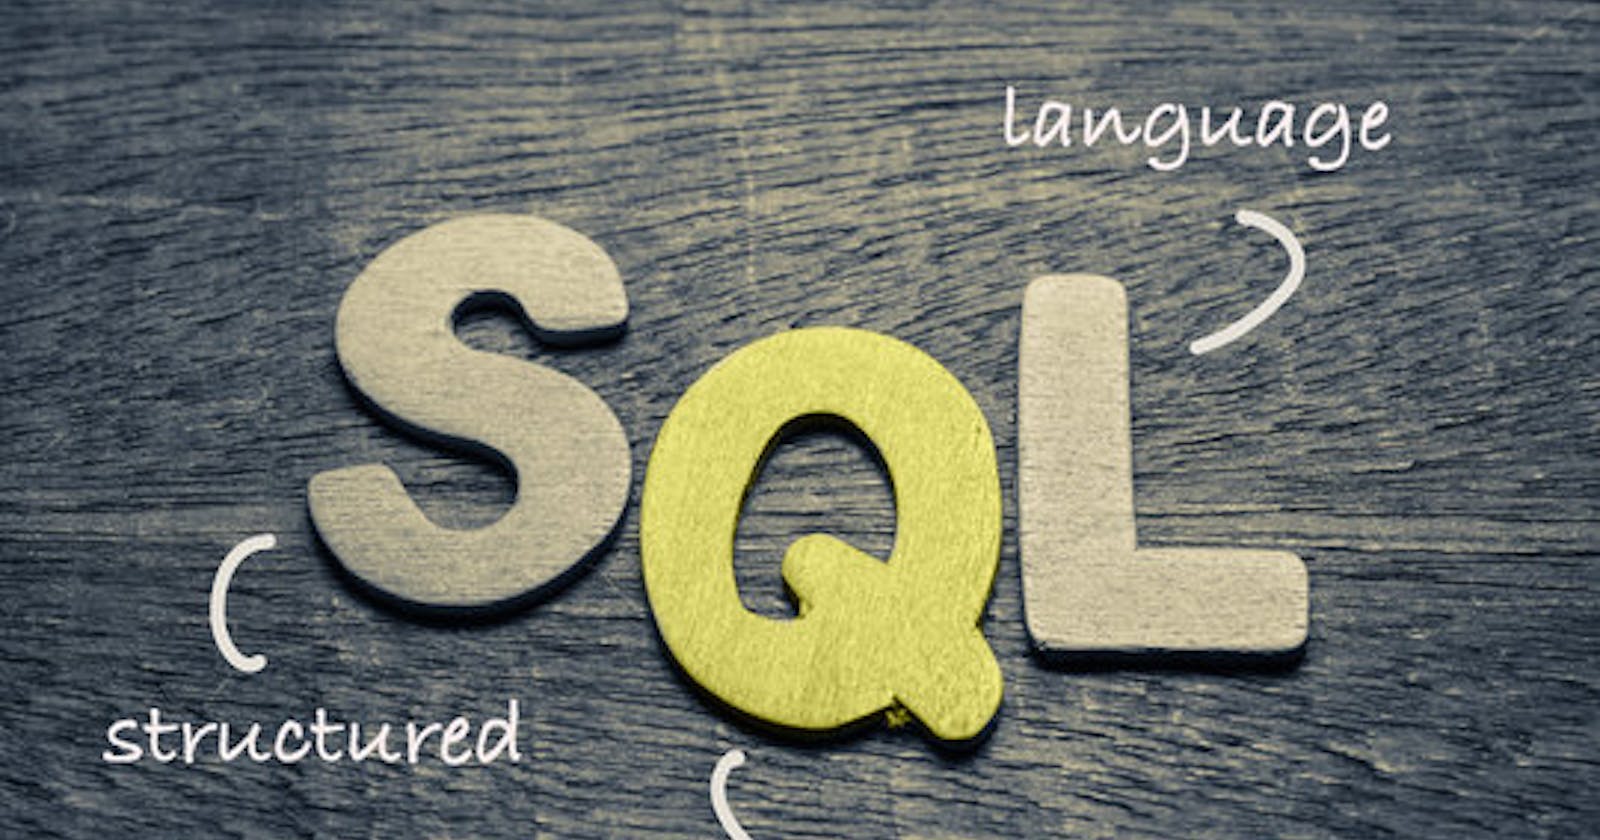 Getting Started with SQL: A Step-by-Step Guide